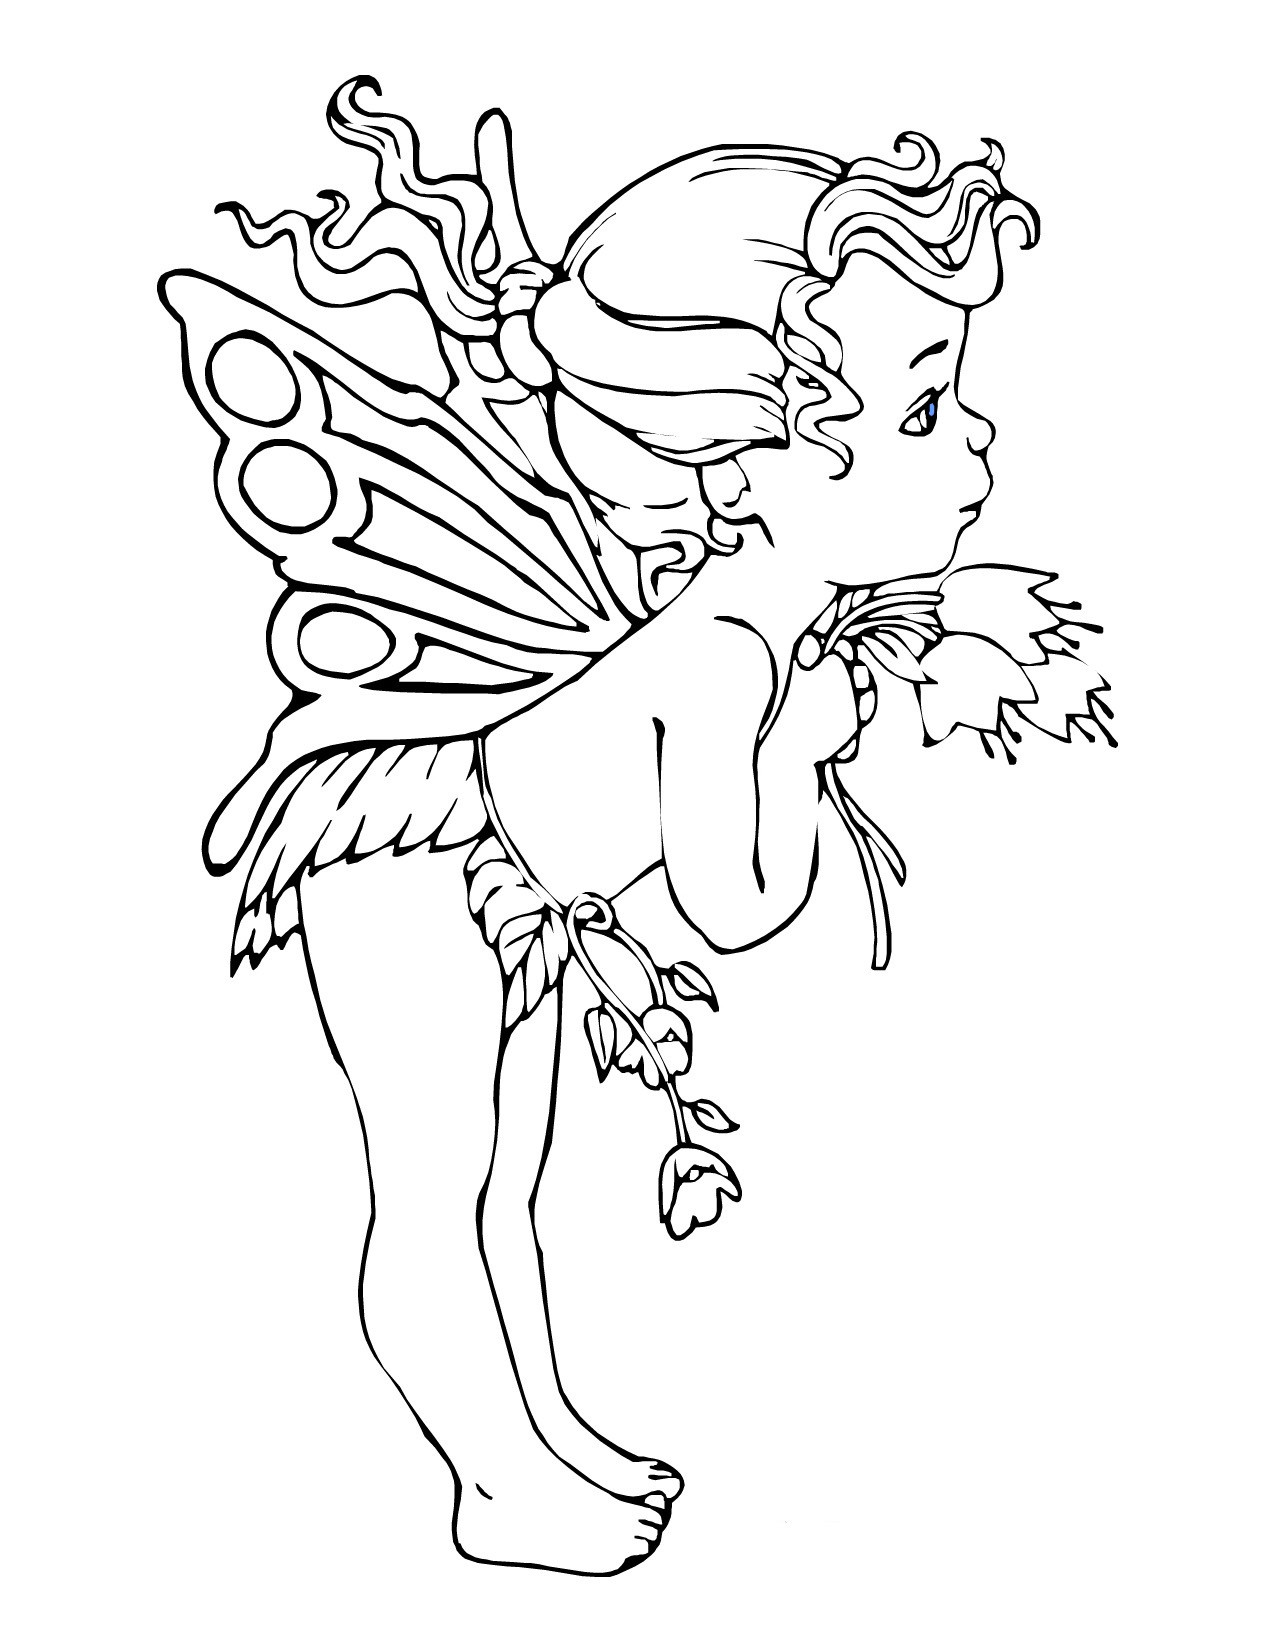 Printable Fairy Coloring Pages For Adults
 Free Printable Fairy Coloring Pages For Kids